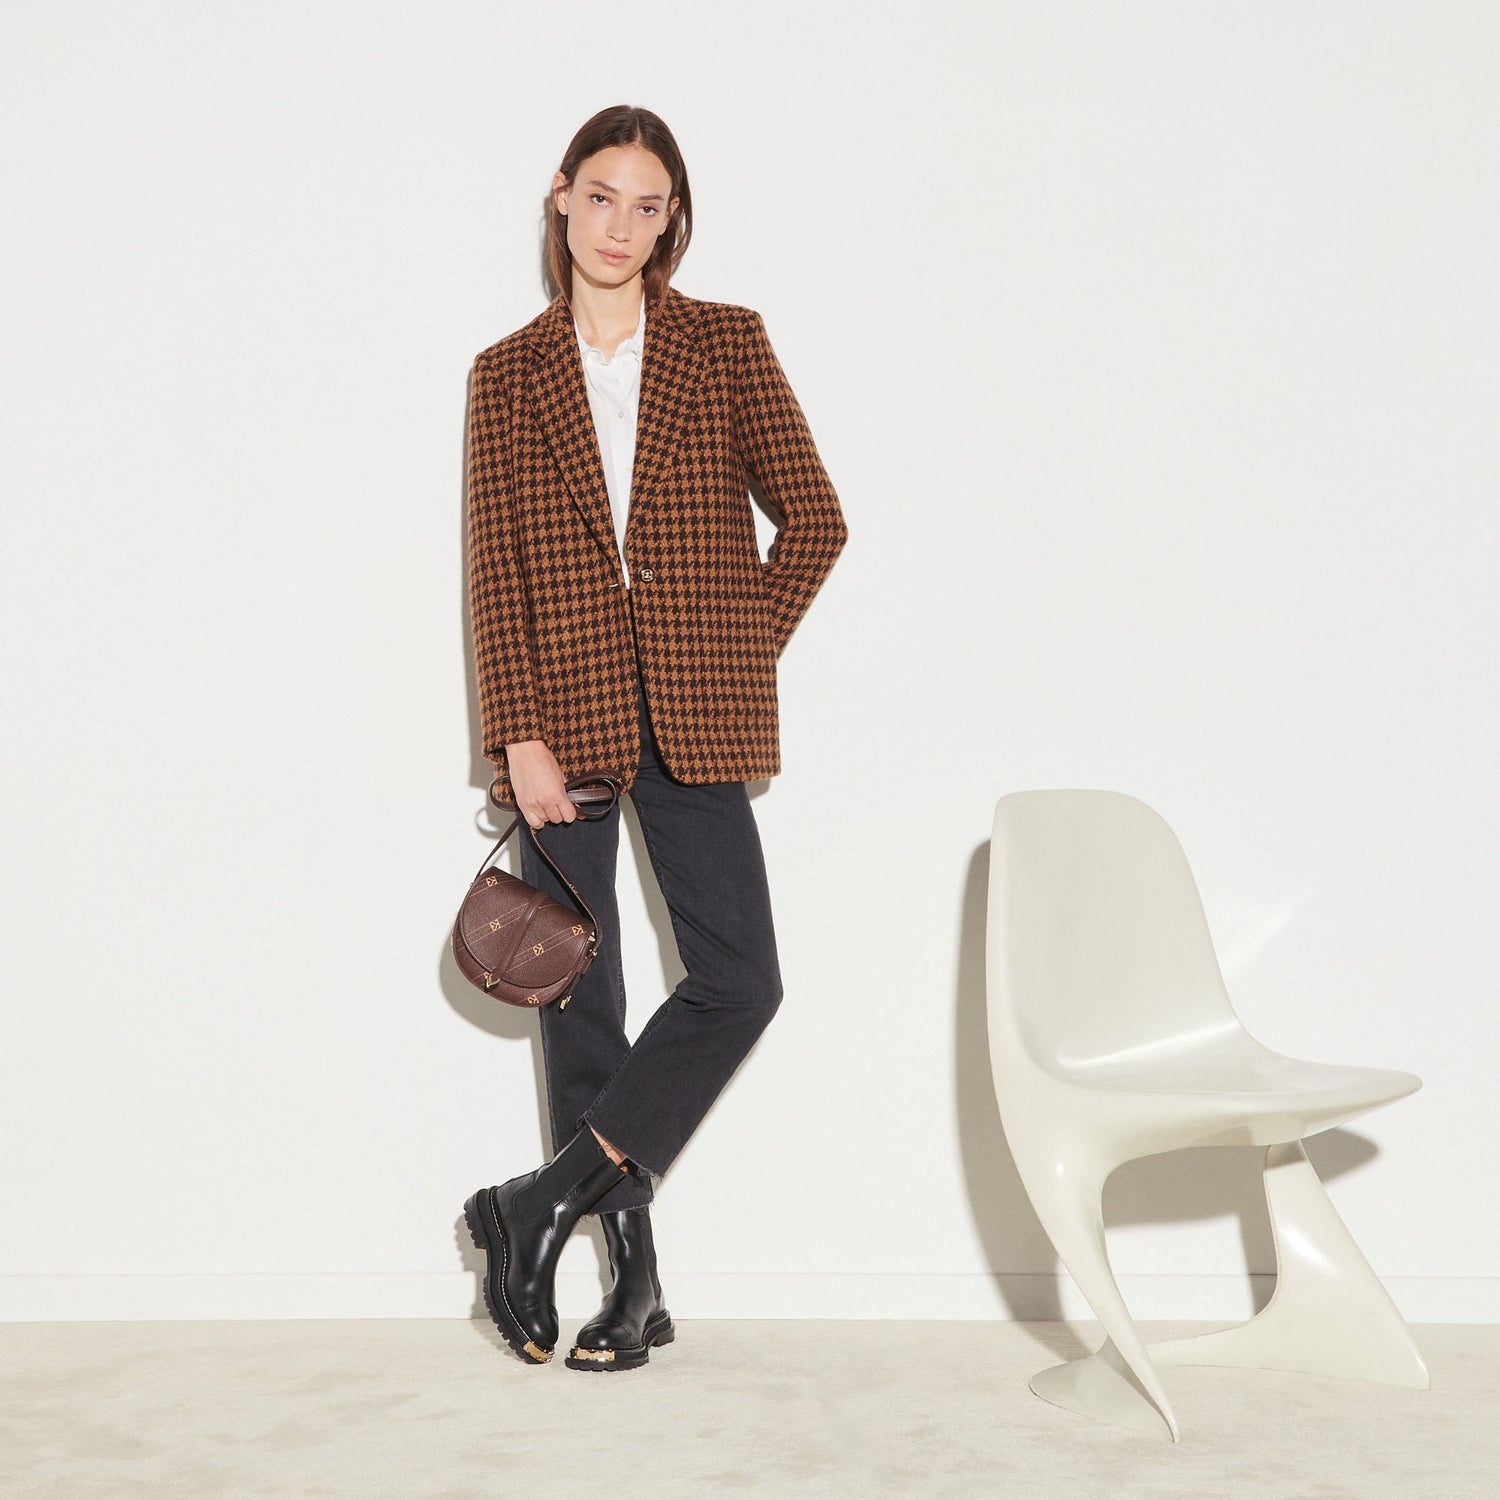 SANDRO - TAILORED JACKET - HOUNDSTOOTH Styled with bag, white chair and black boots